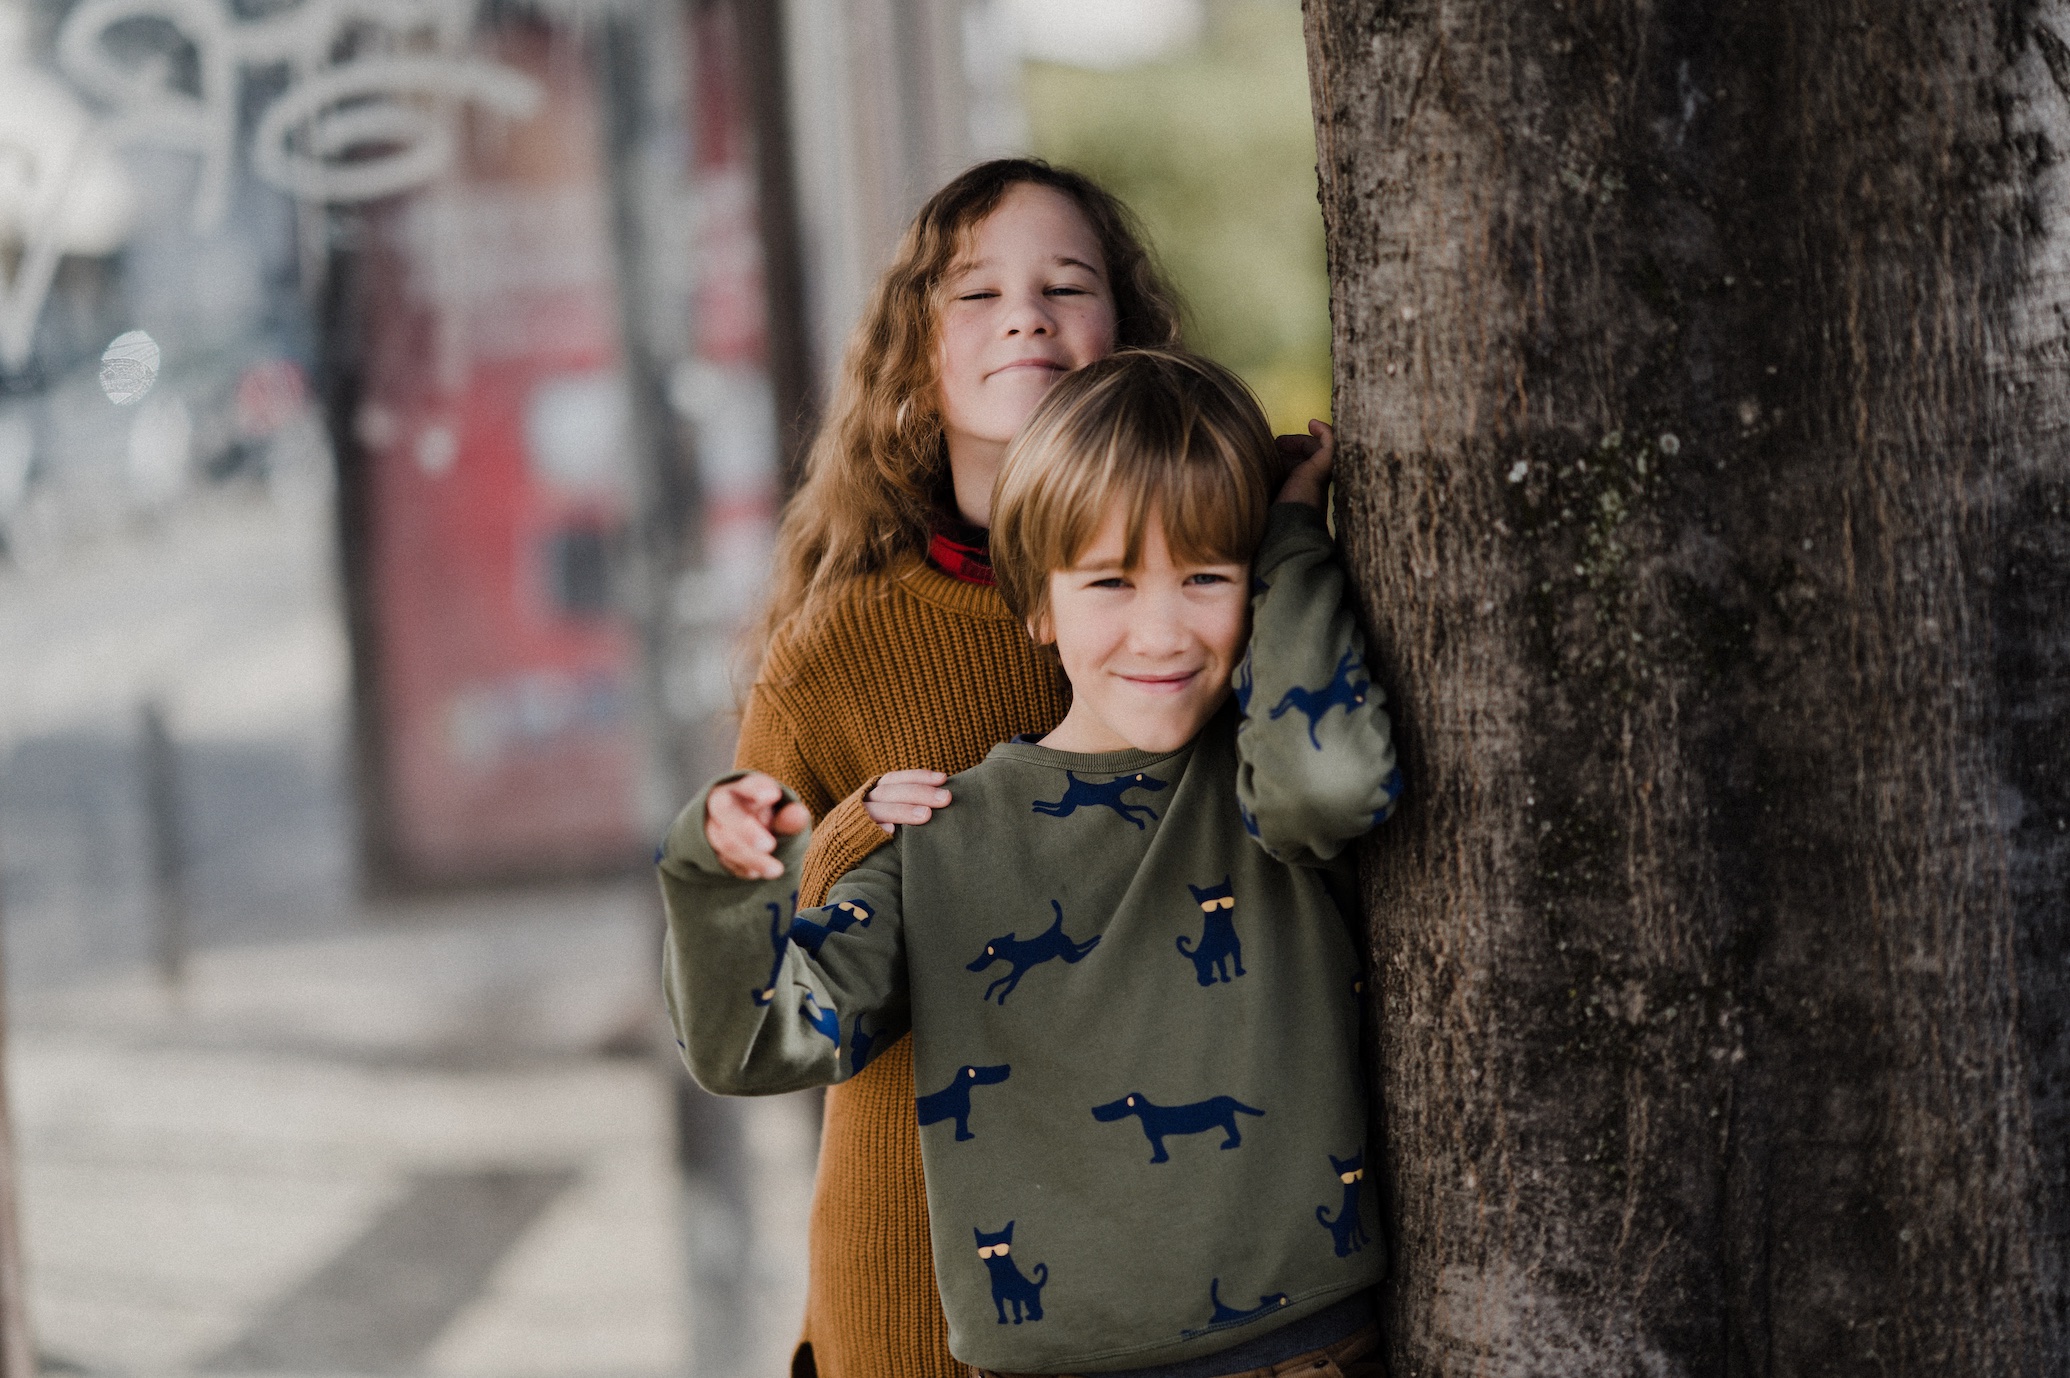 Young boy in sweatshirt and young girl in sweater standing by tree; image by Annie Spratt, via Unsplash.com.